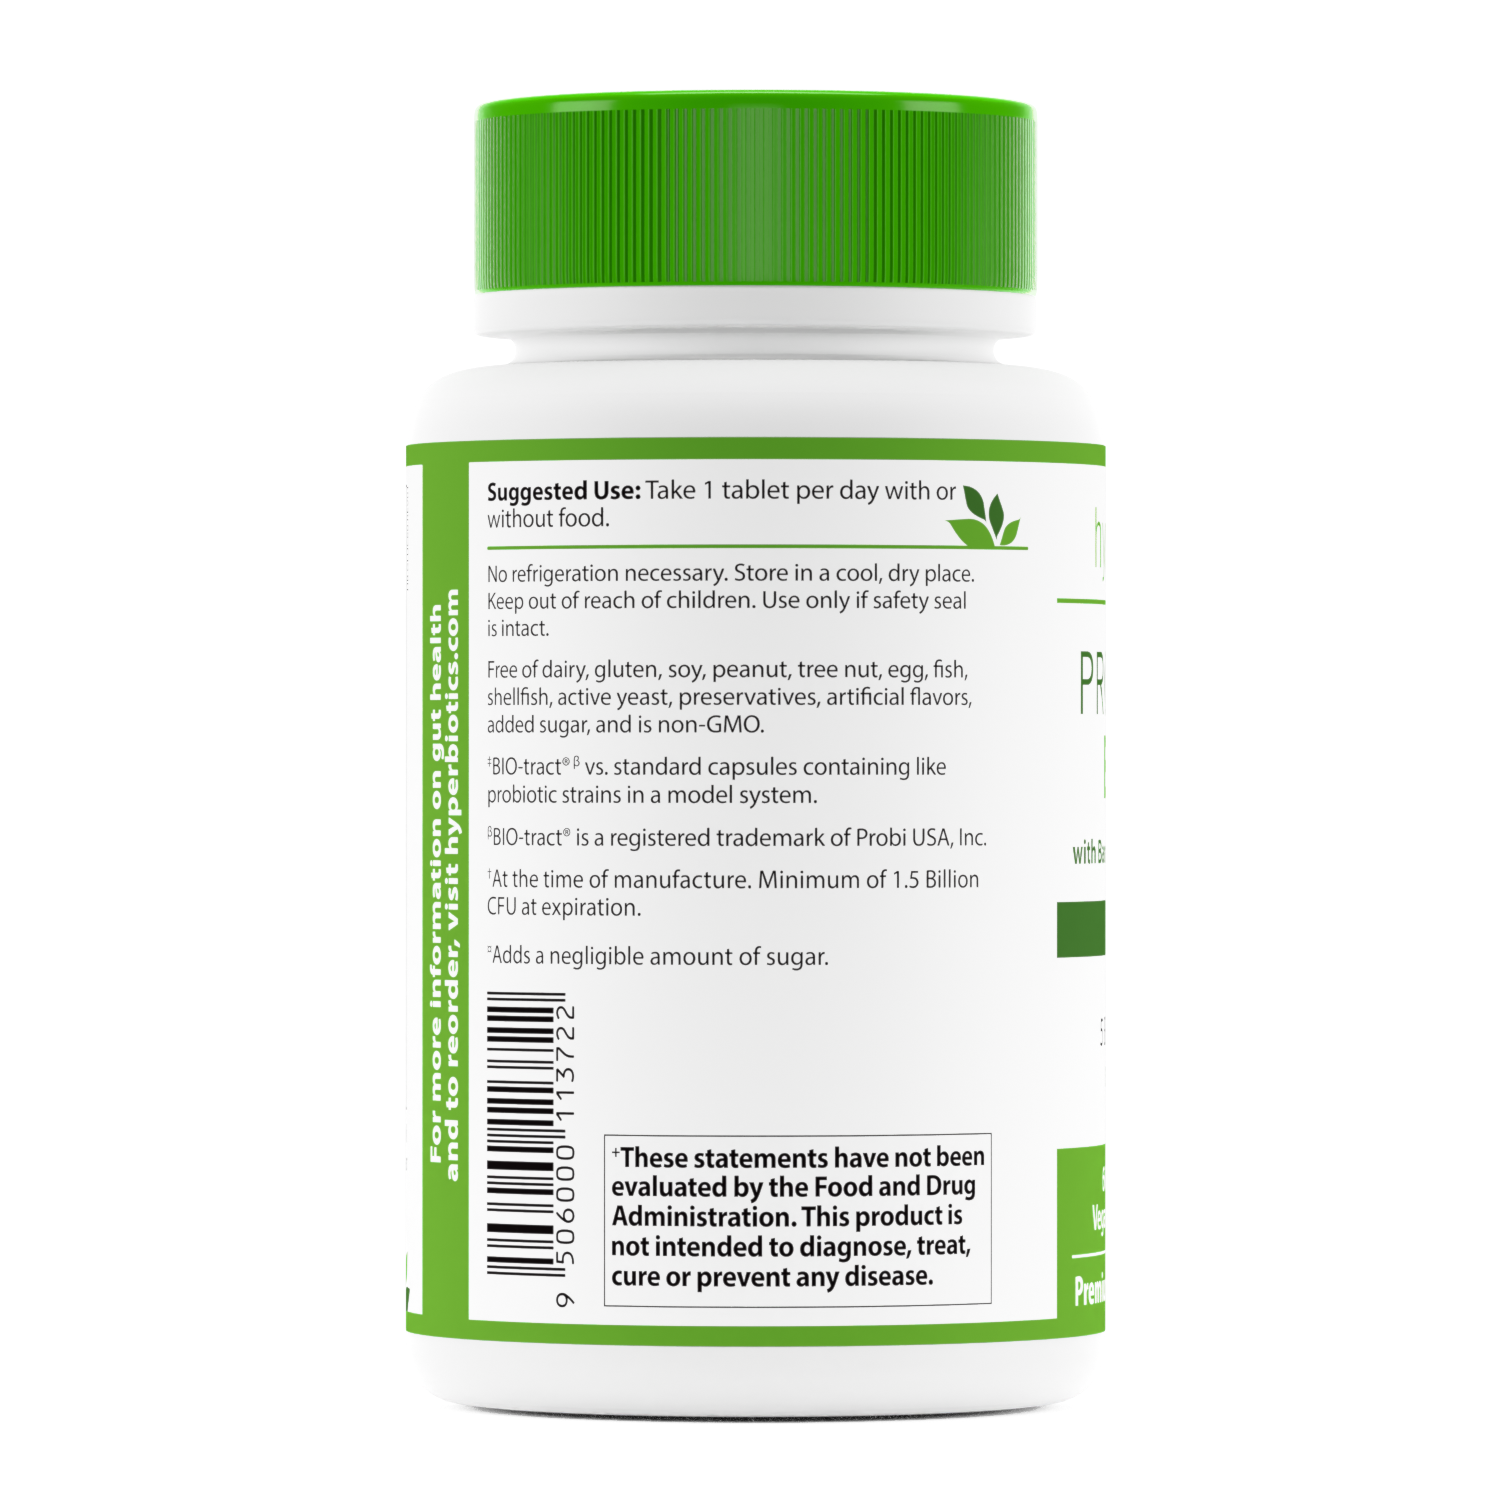 Hyperbiotics PRO-Glucose Support Probiotic Suggested Use and informational panel of bottle.